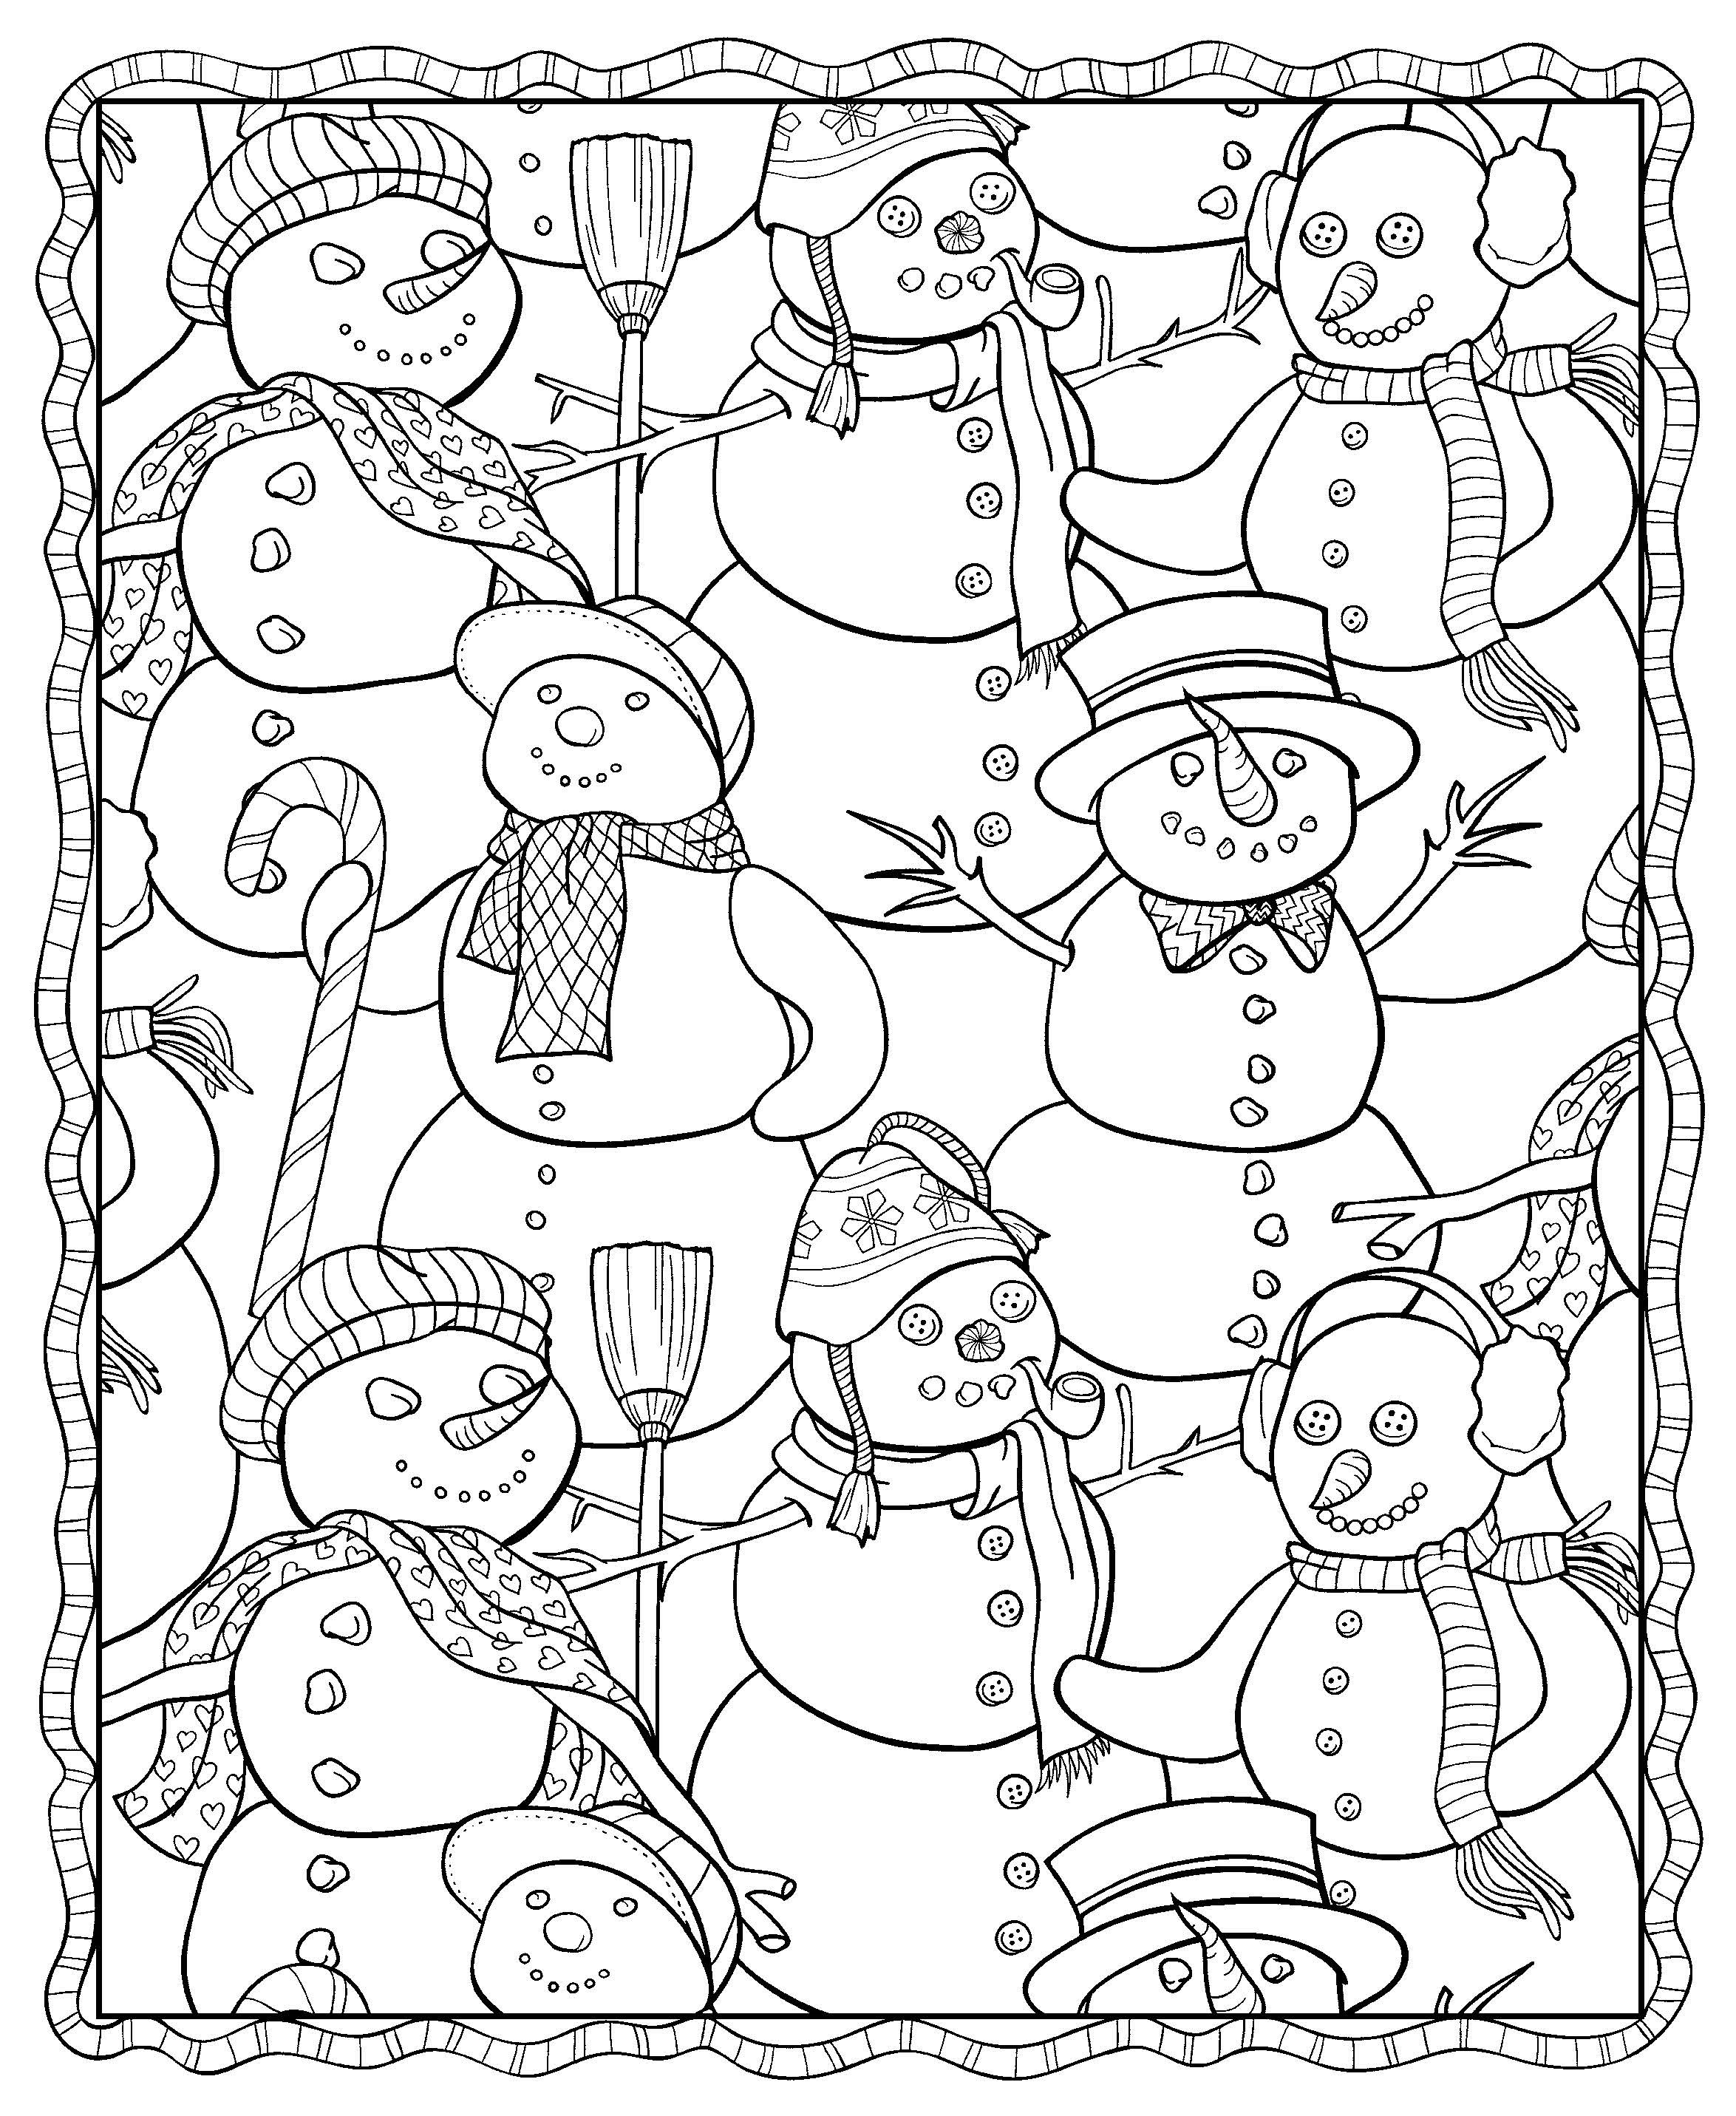 Download Winter Coloring Pages For Adults Best Coloring Pages For Kids